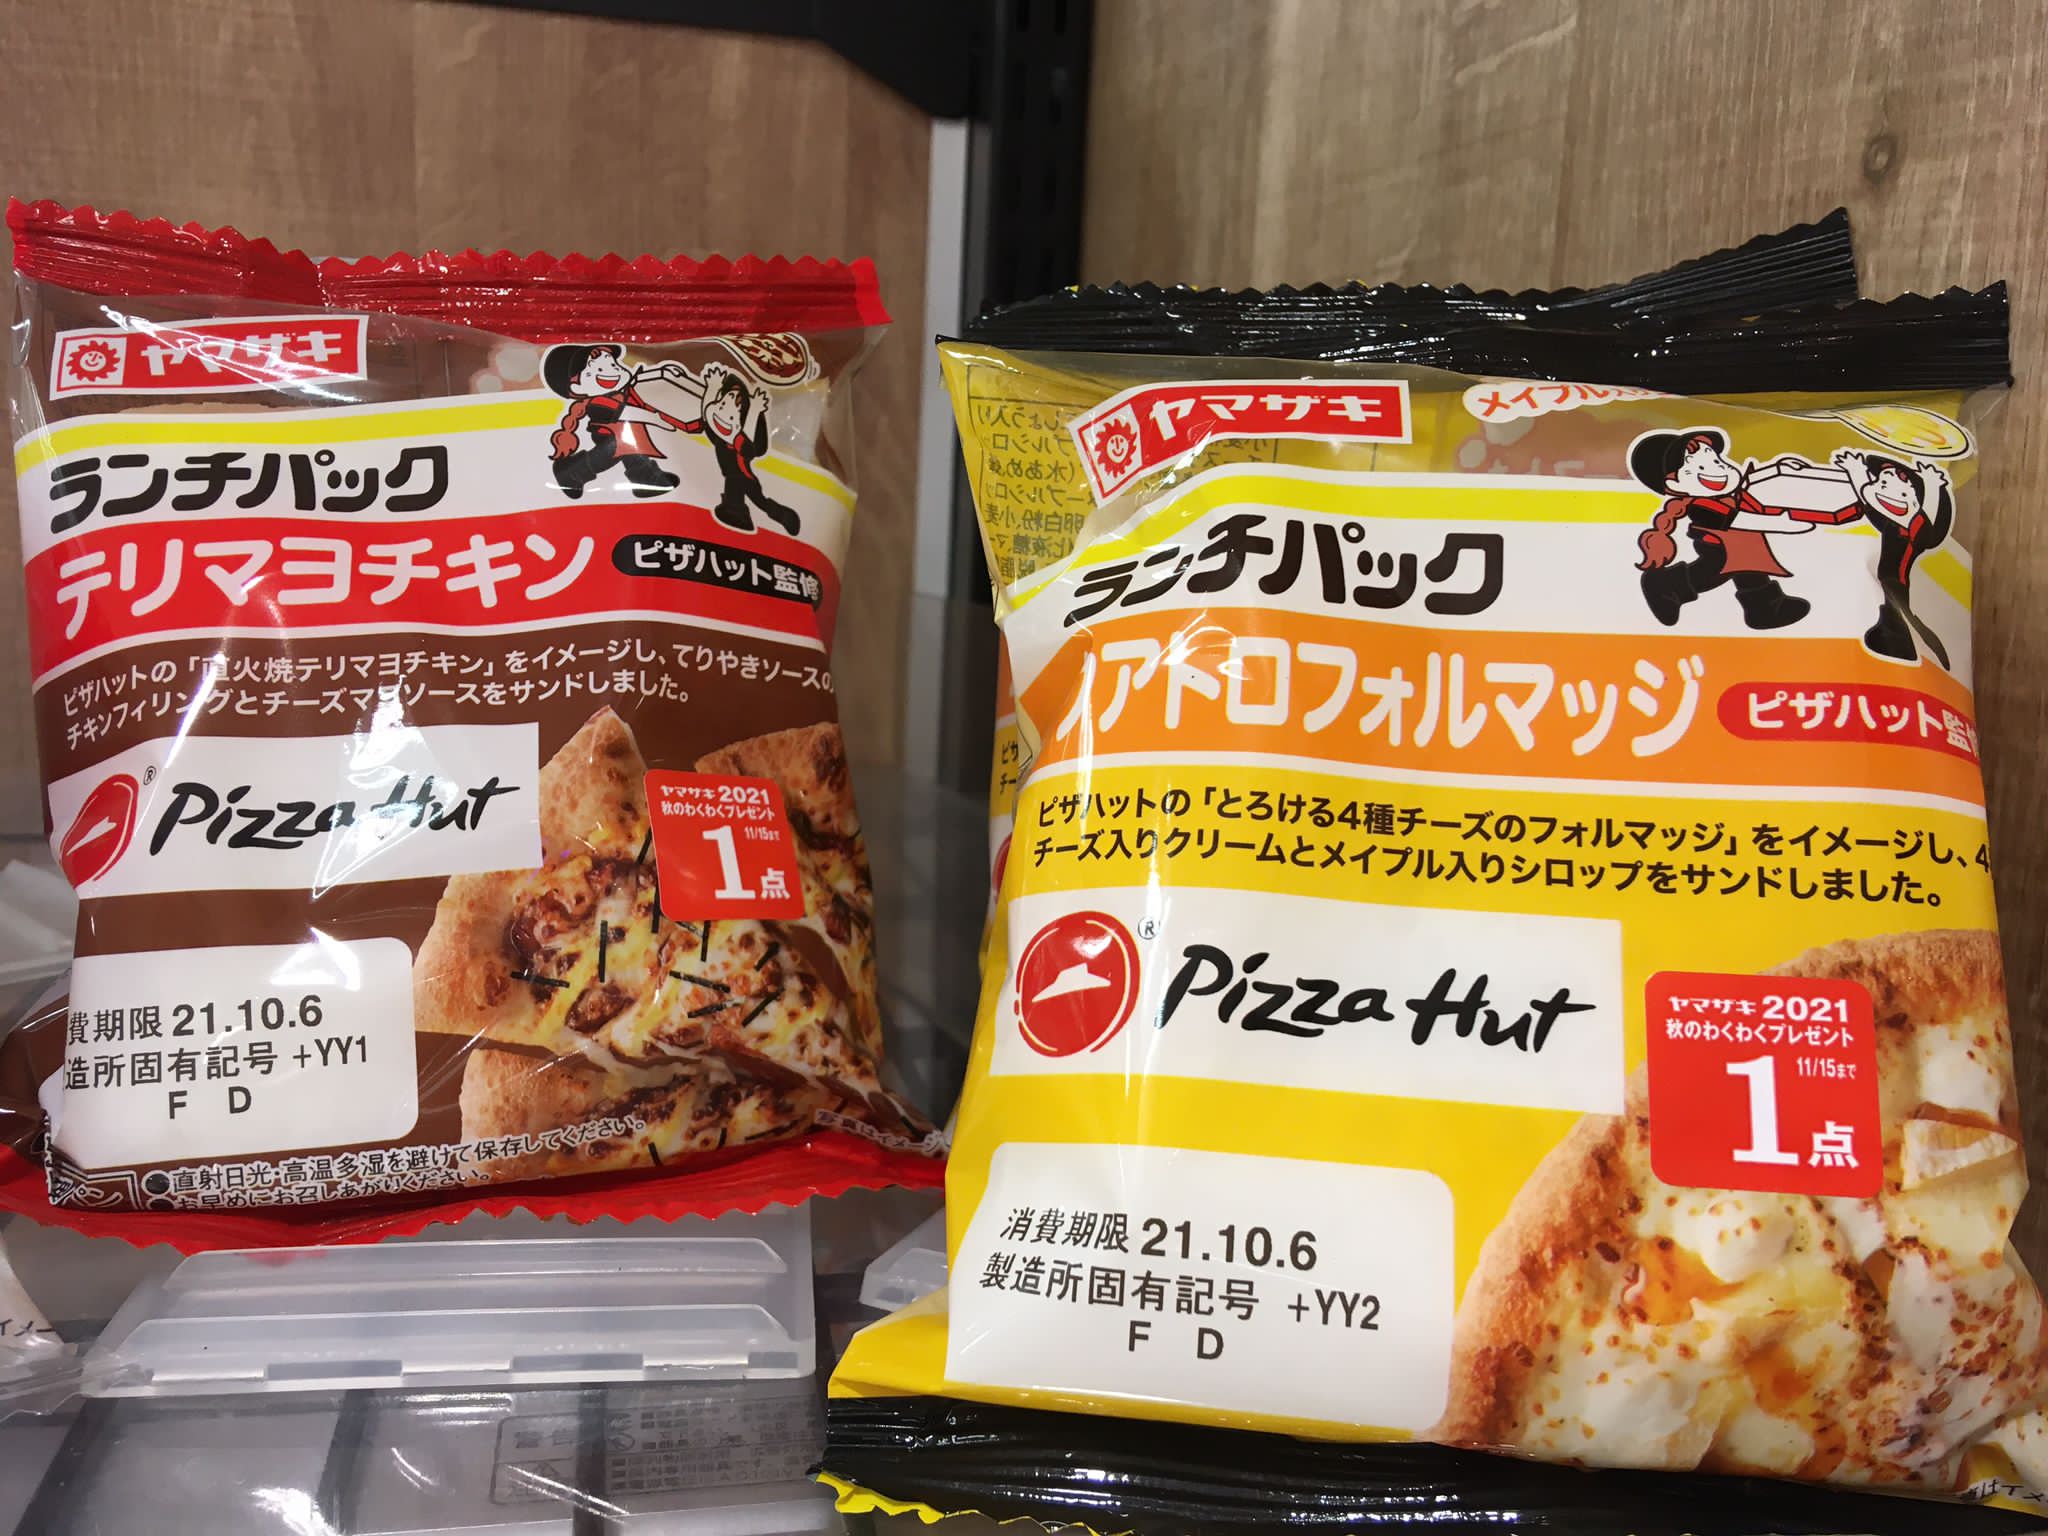 Japan S Pizza Hut Lunch Pack Sandwiches Are Here Taste Test Soranews24 Japan News